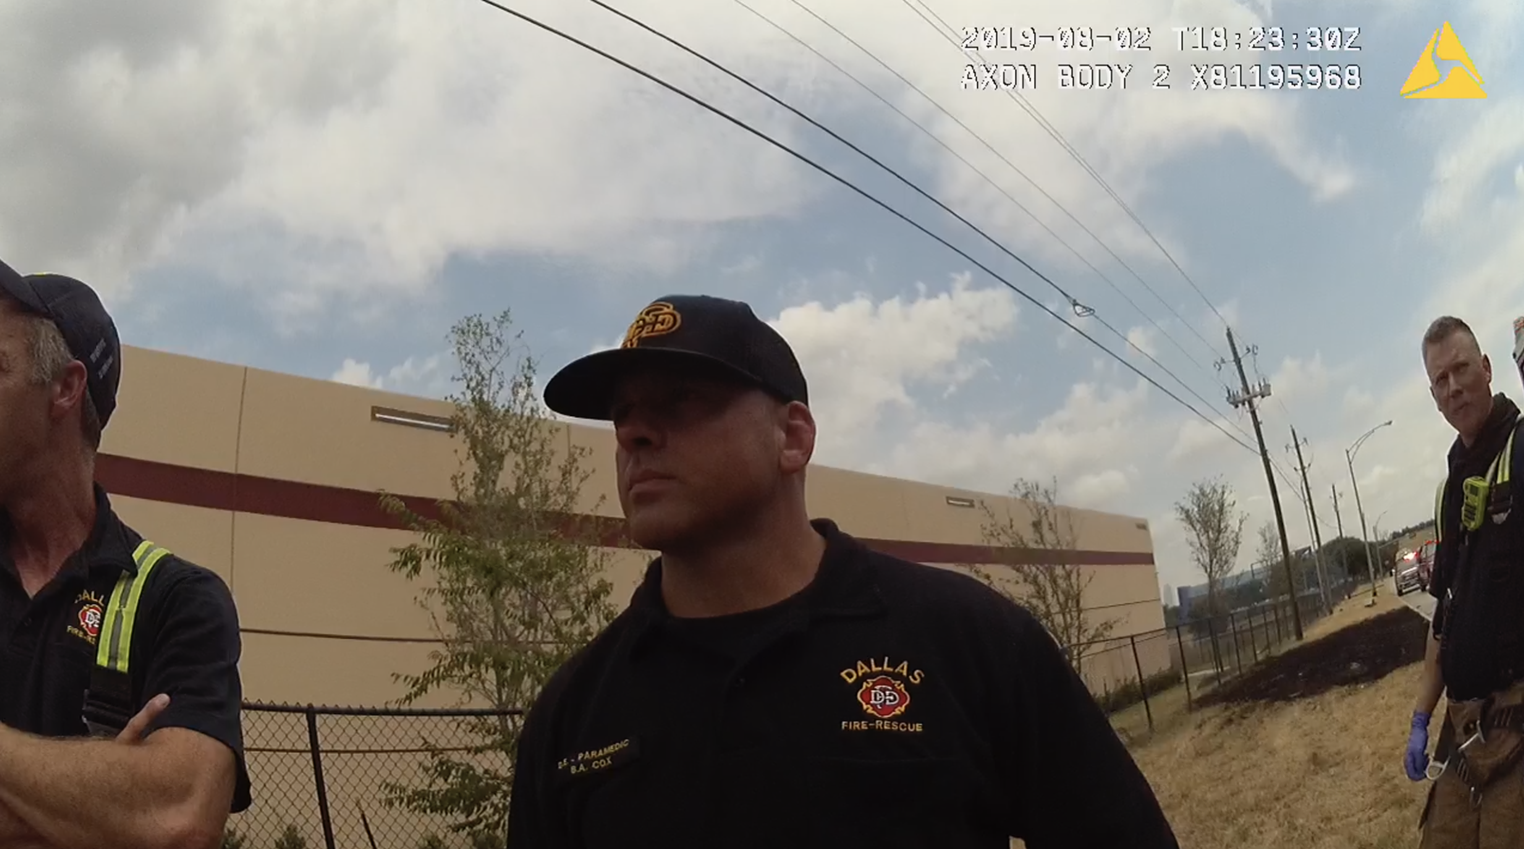 New Details Emerge Out of Second Investigation Into Dallas Paramedic Who Kicked Mentally Ill Man